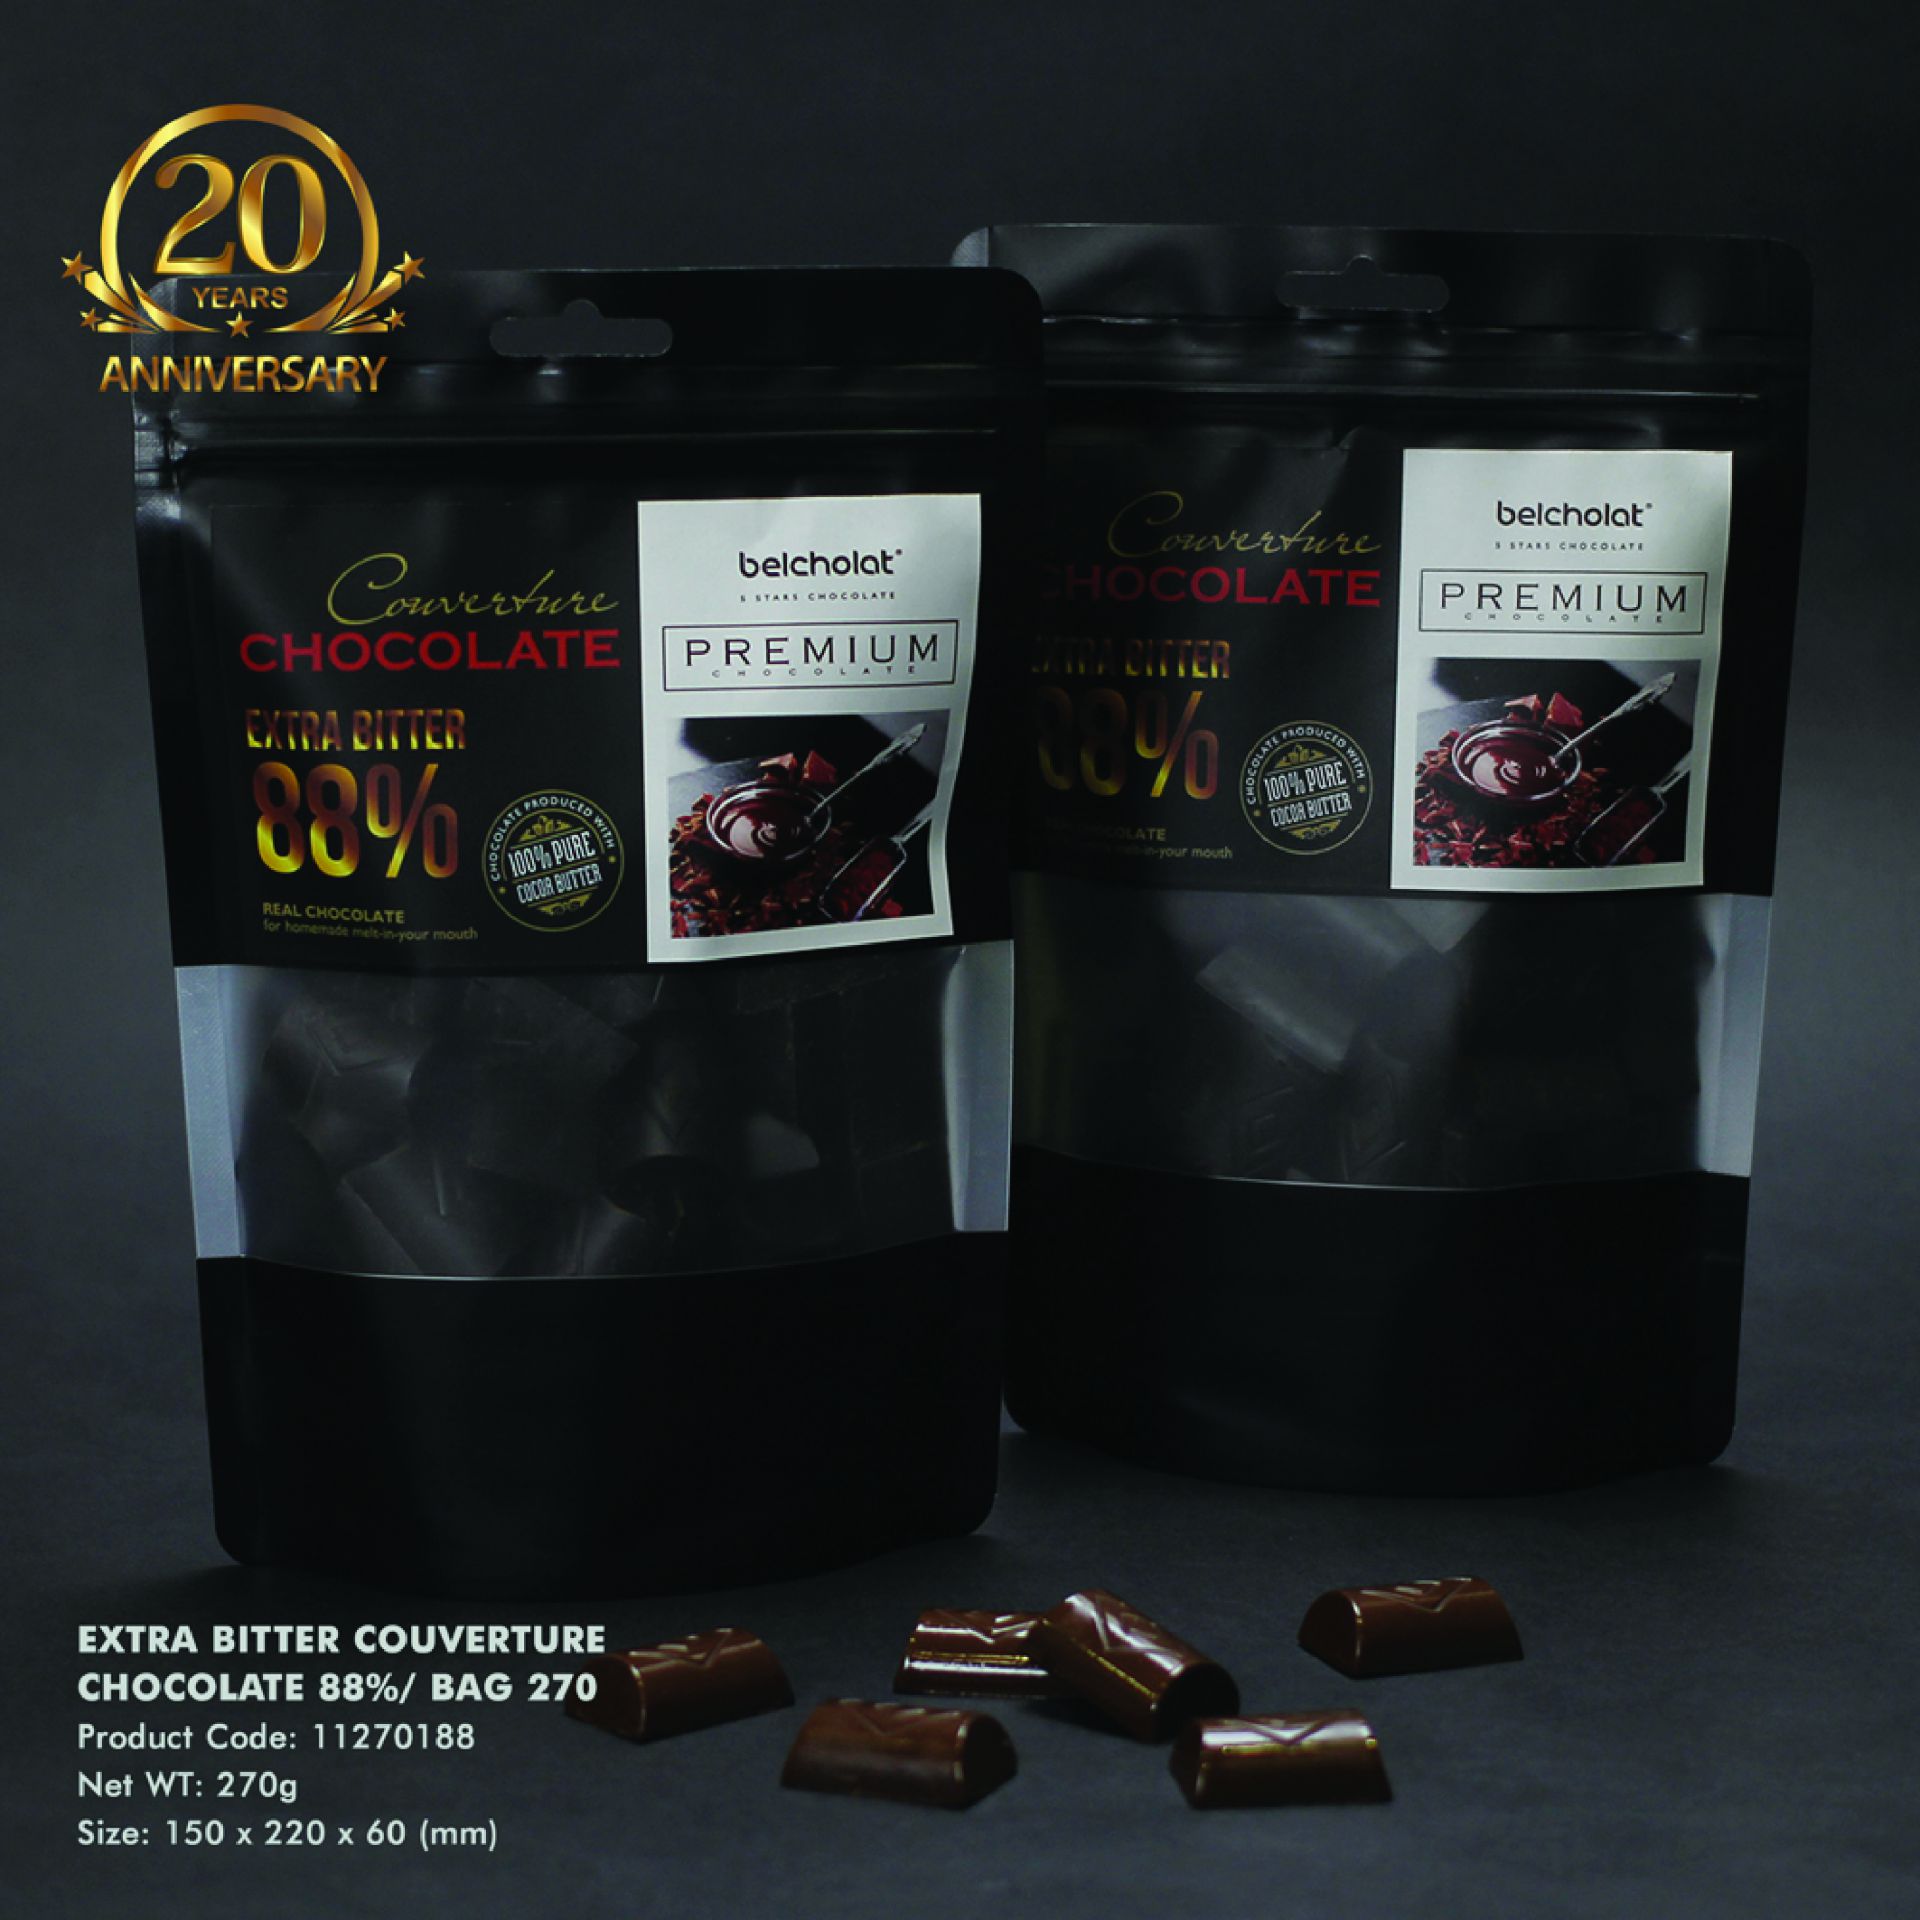 Extra Bitter Couverture Chocolate 88% / Bag 270